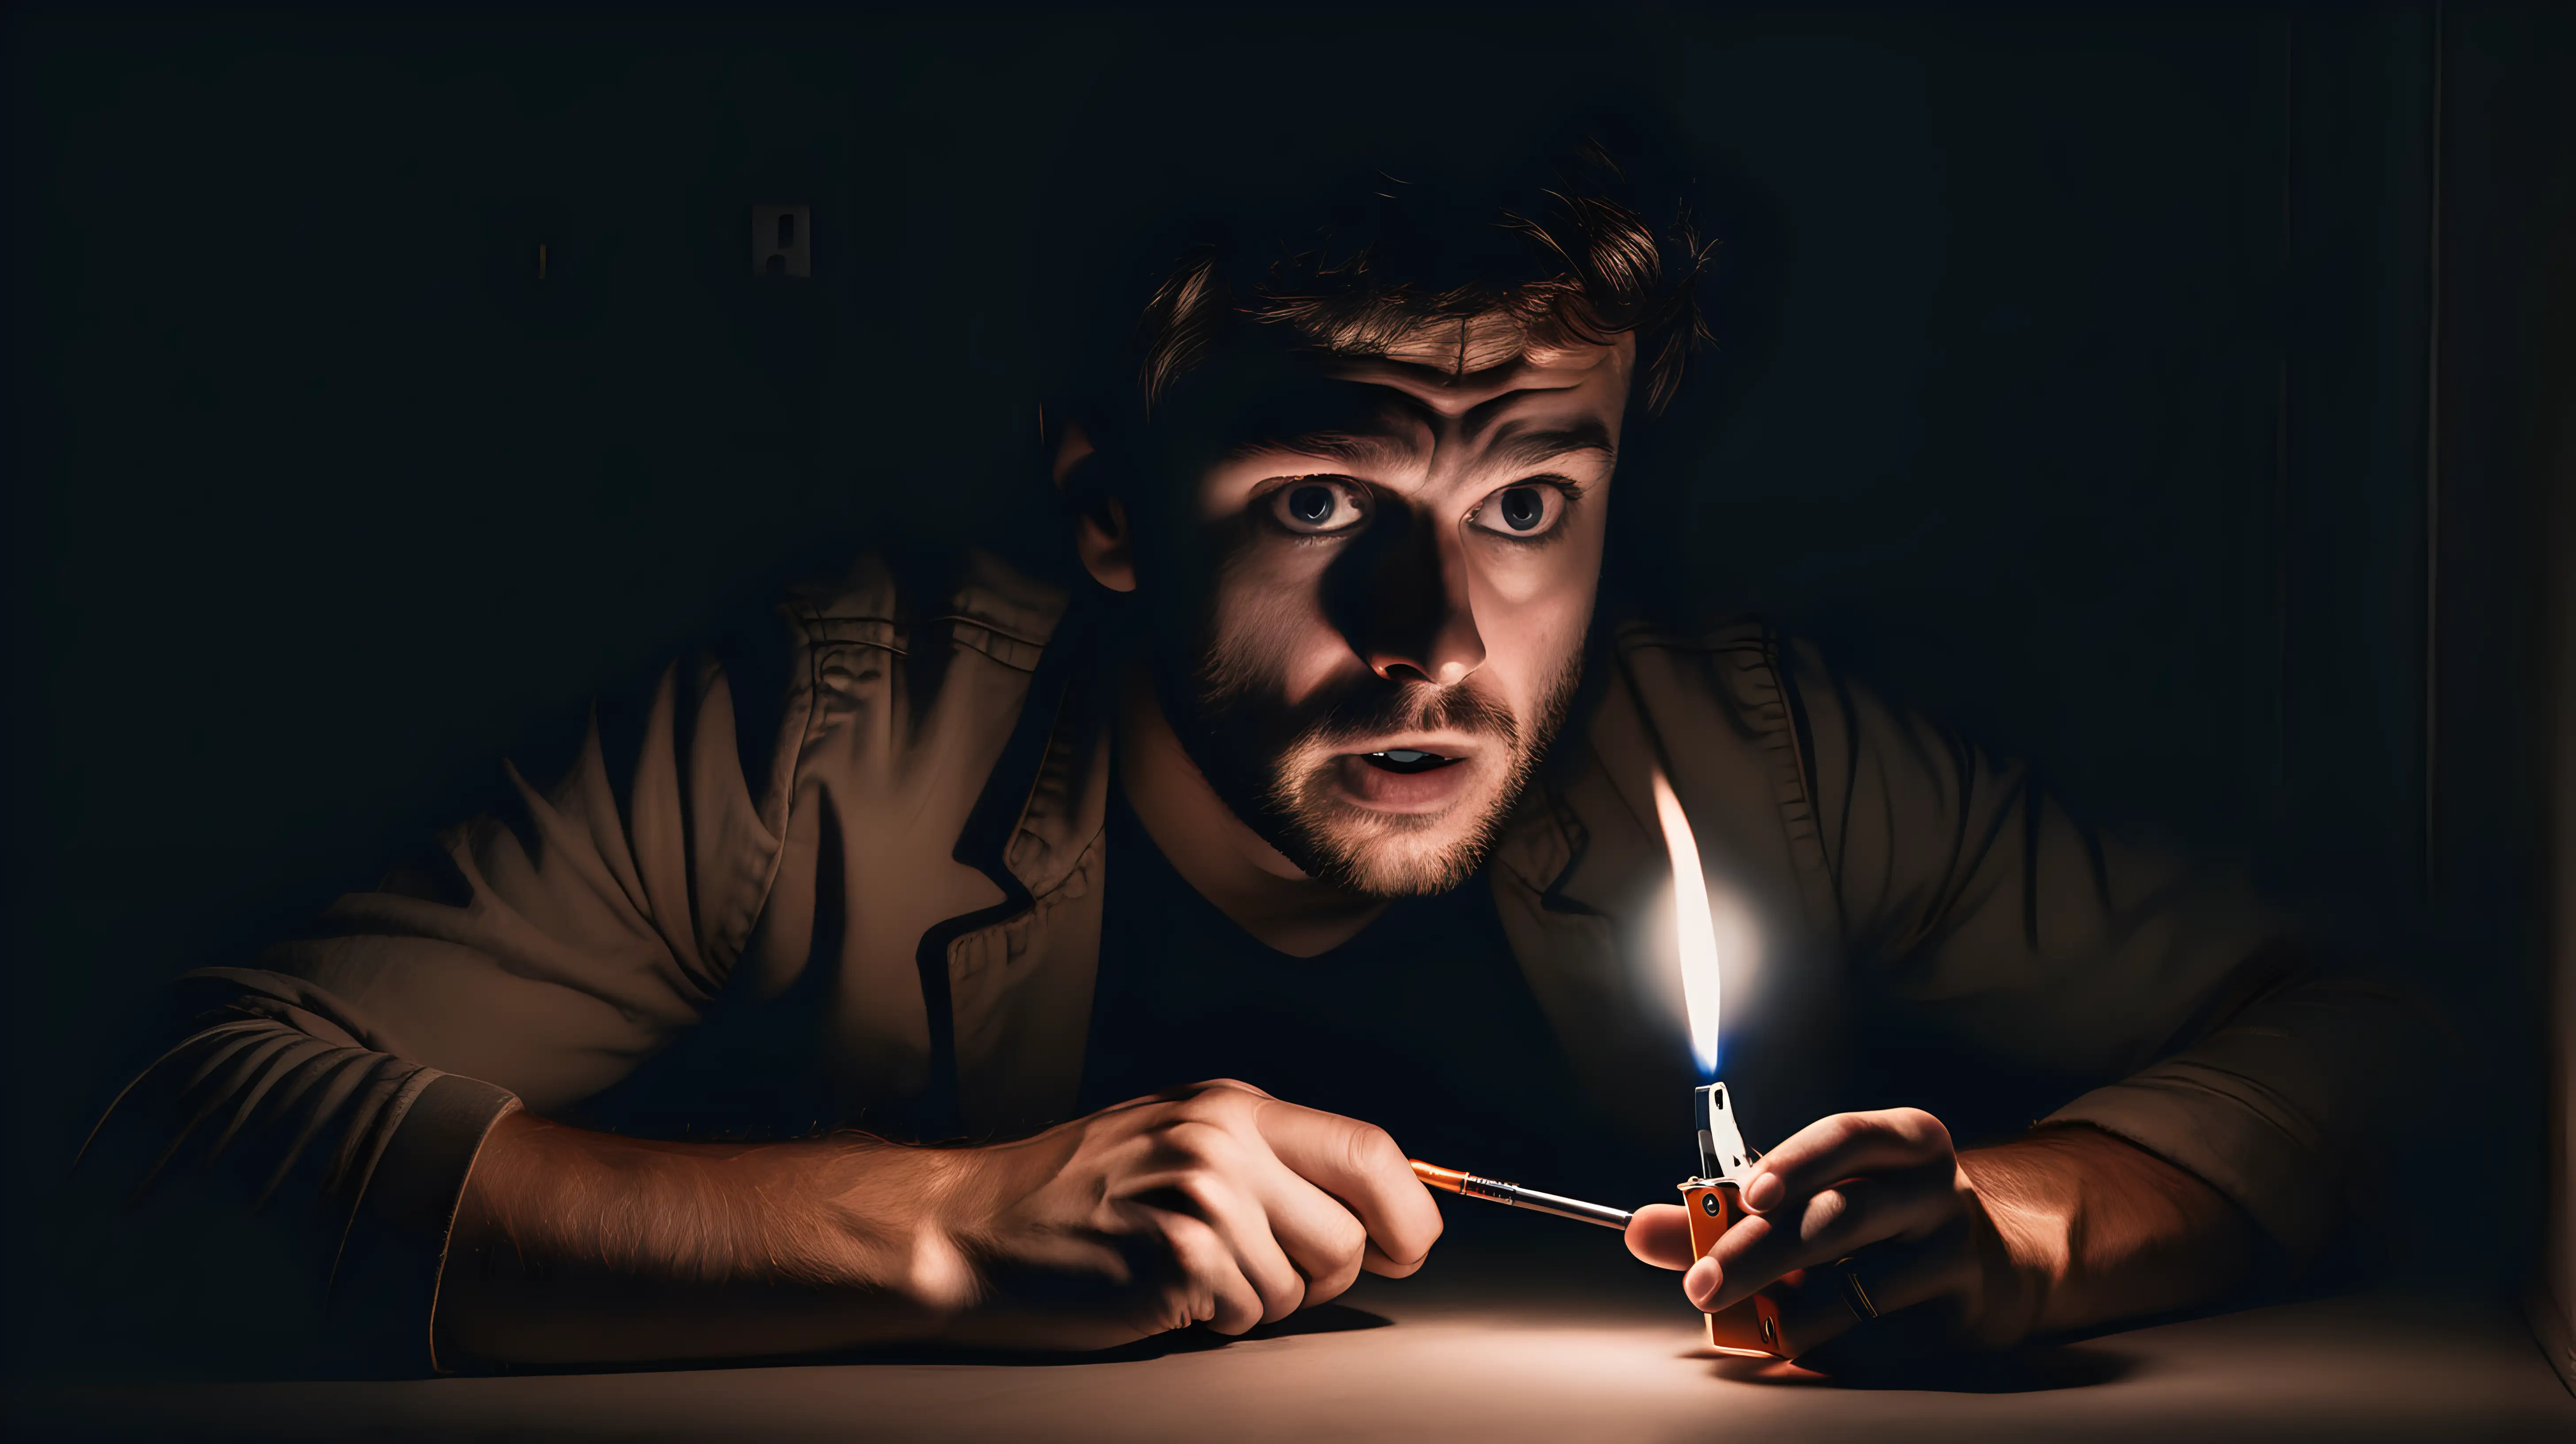 Fearful Man in Darkness Struggling with Lighter